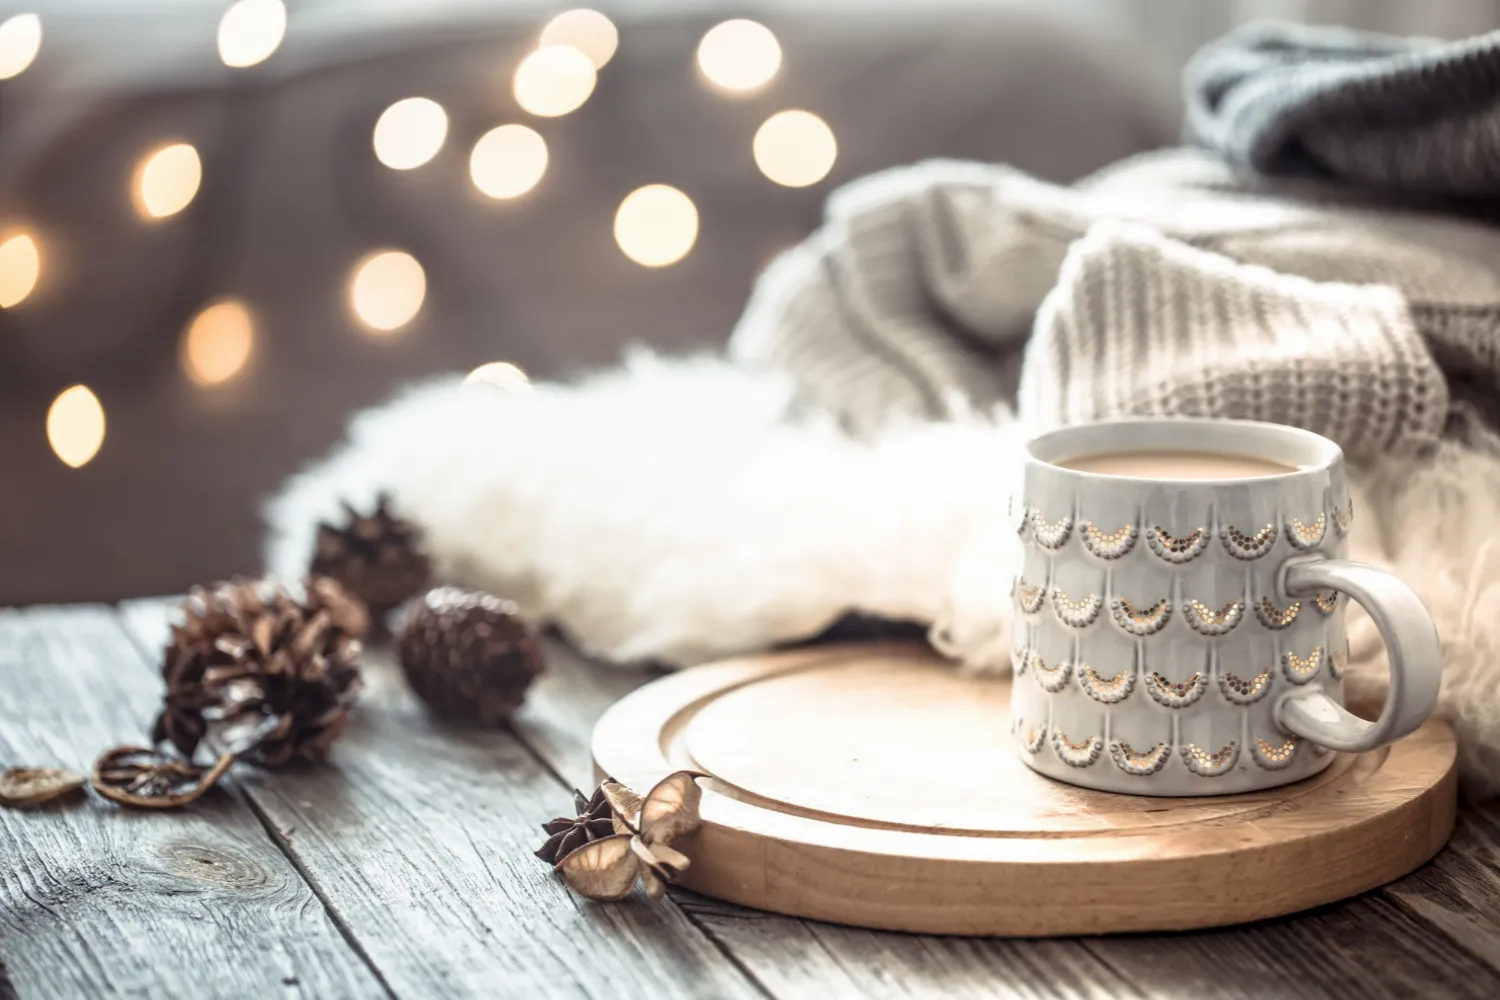 coffee-cup-christmas-lights-bokeh-home-wooden-table-with-sweater-wall-decorations-holiday-decoration